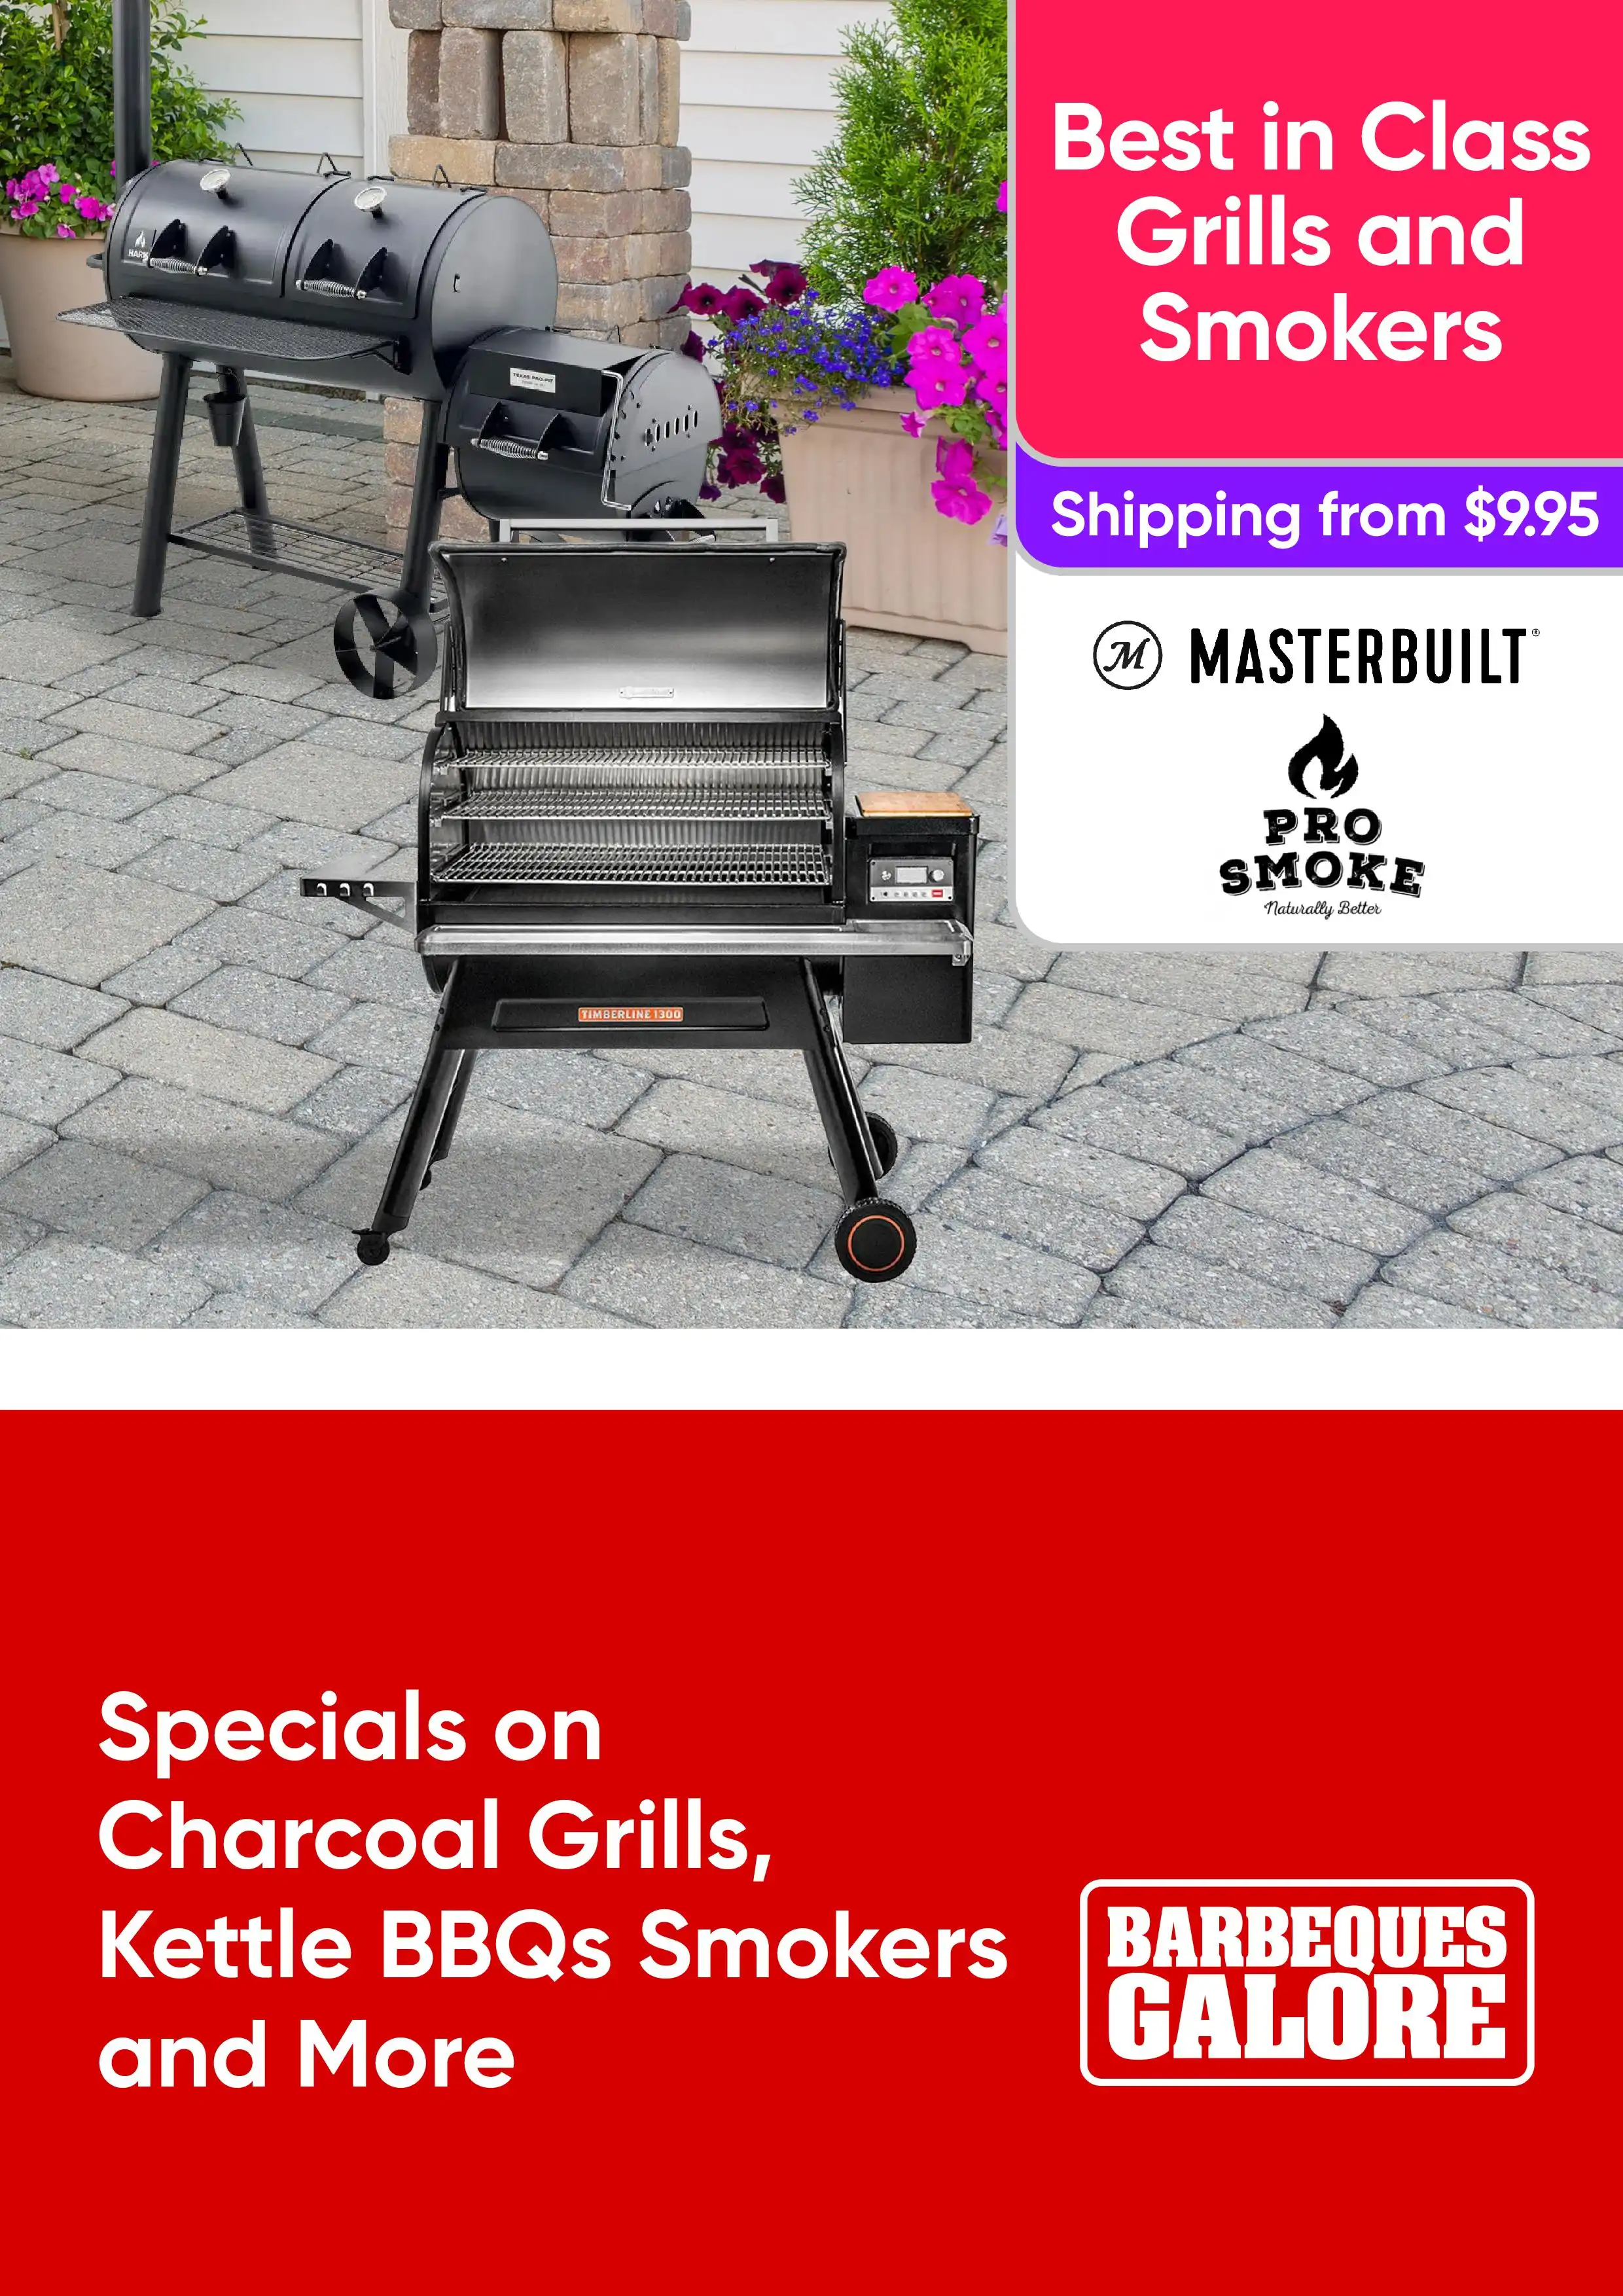 Specials on Charcoal Grills, Kettle BBQs Smokers and More